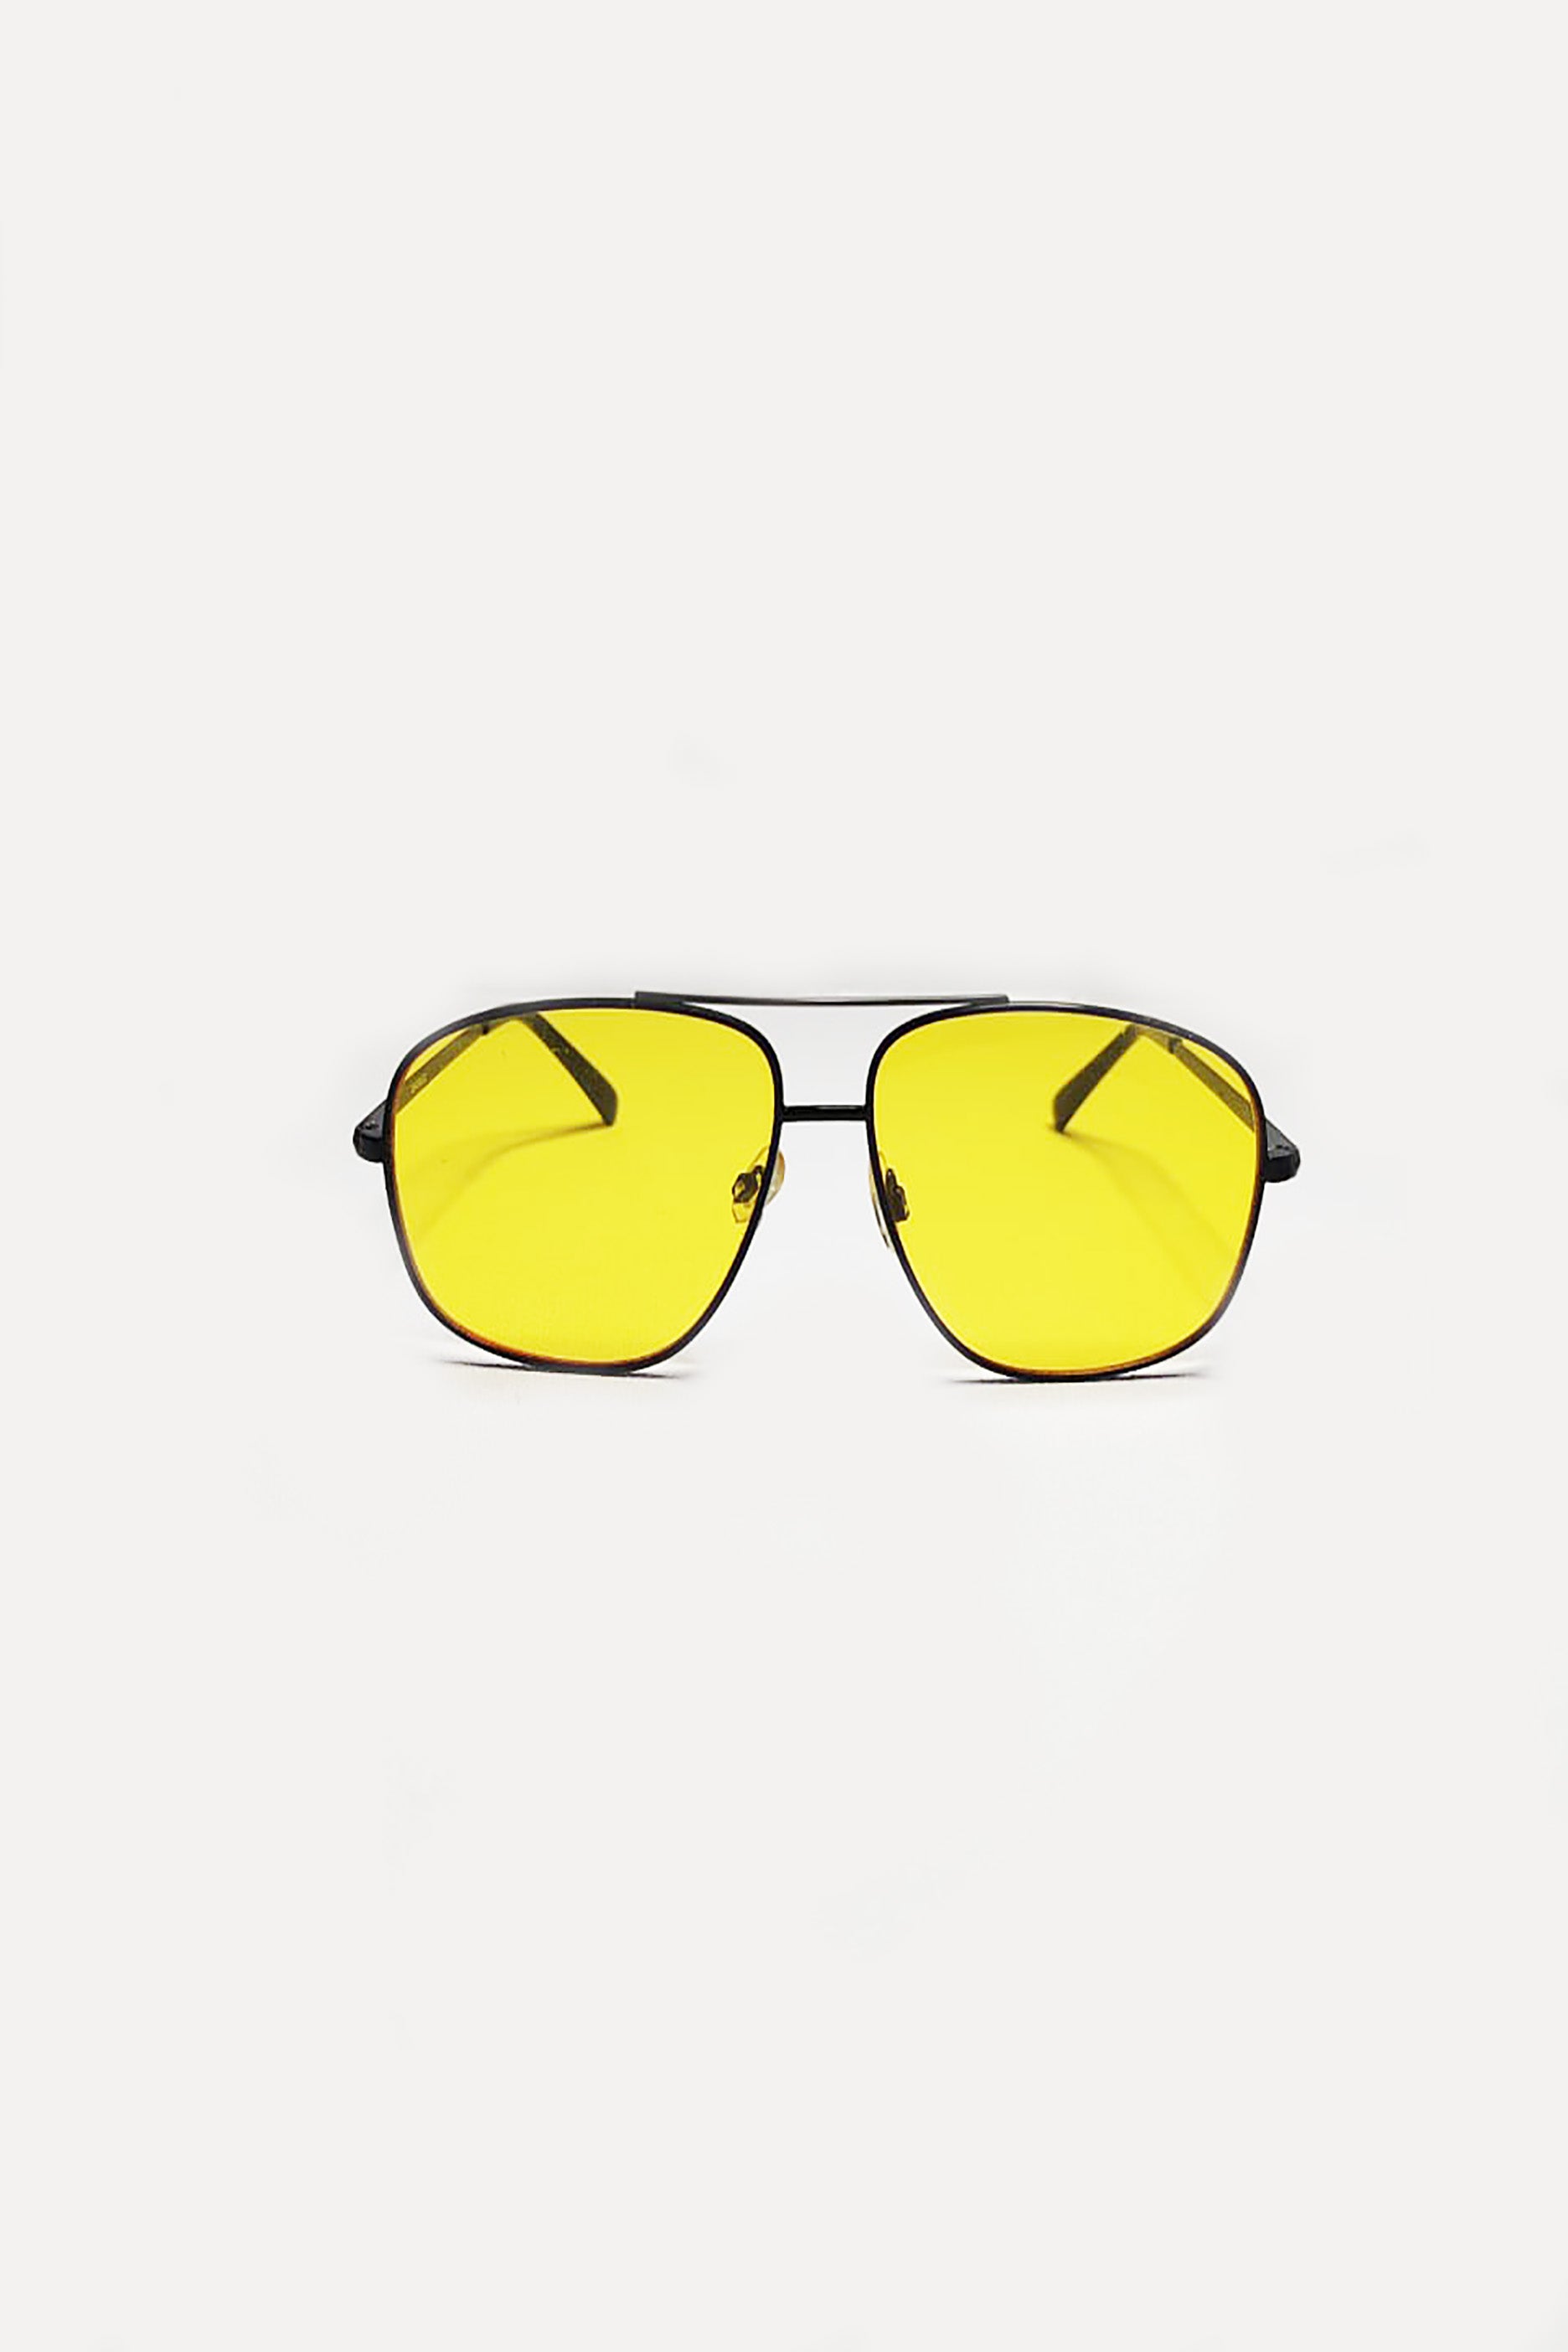 Black Frame Sunglasses with Yellow Tinted